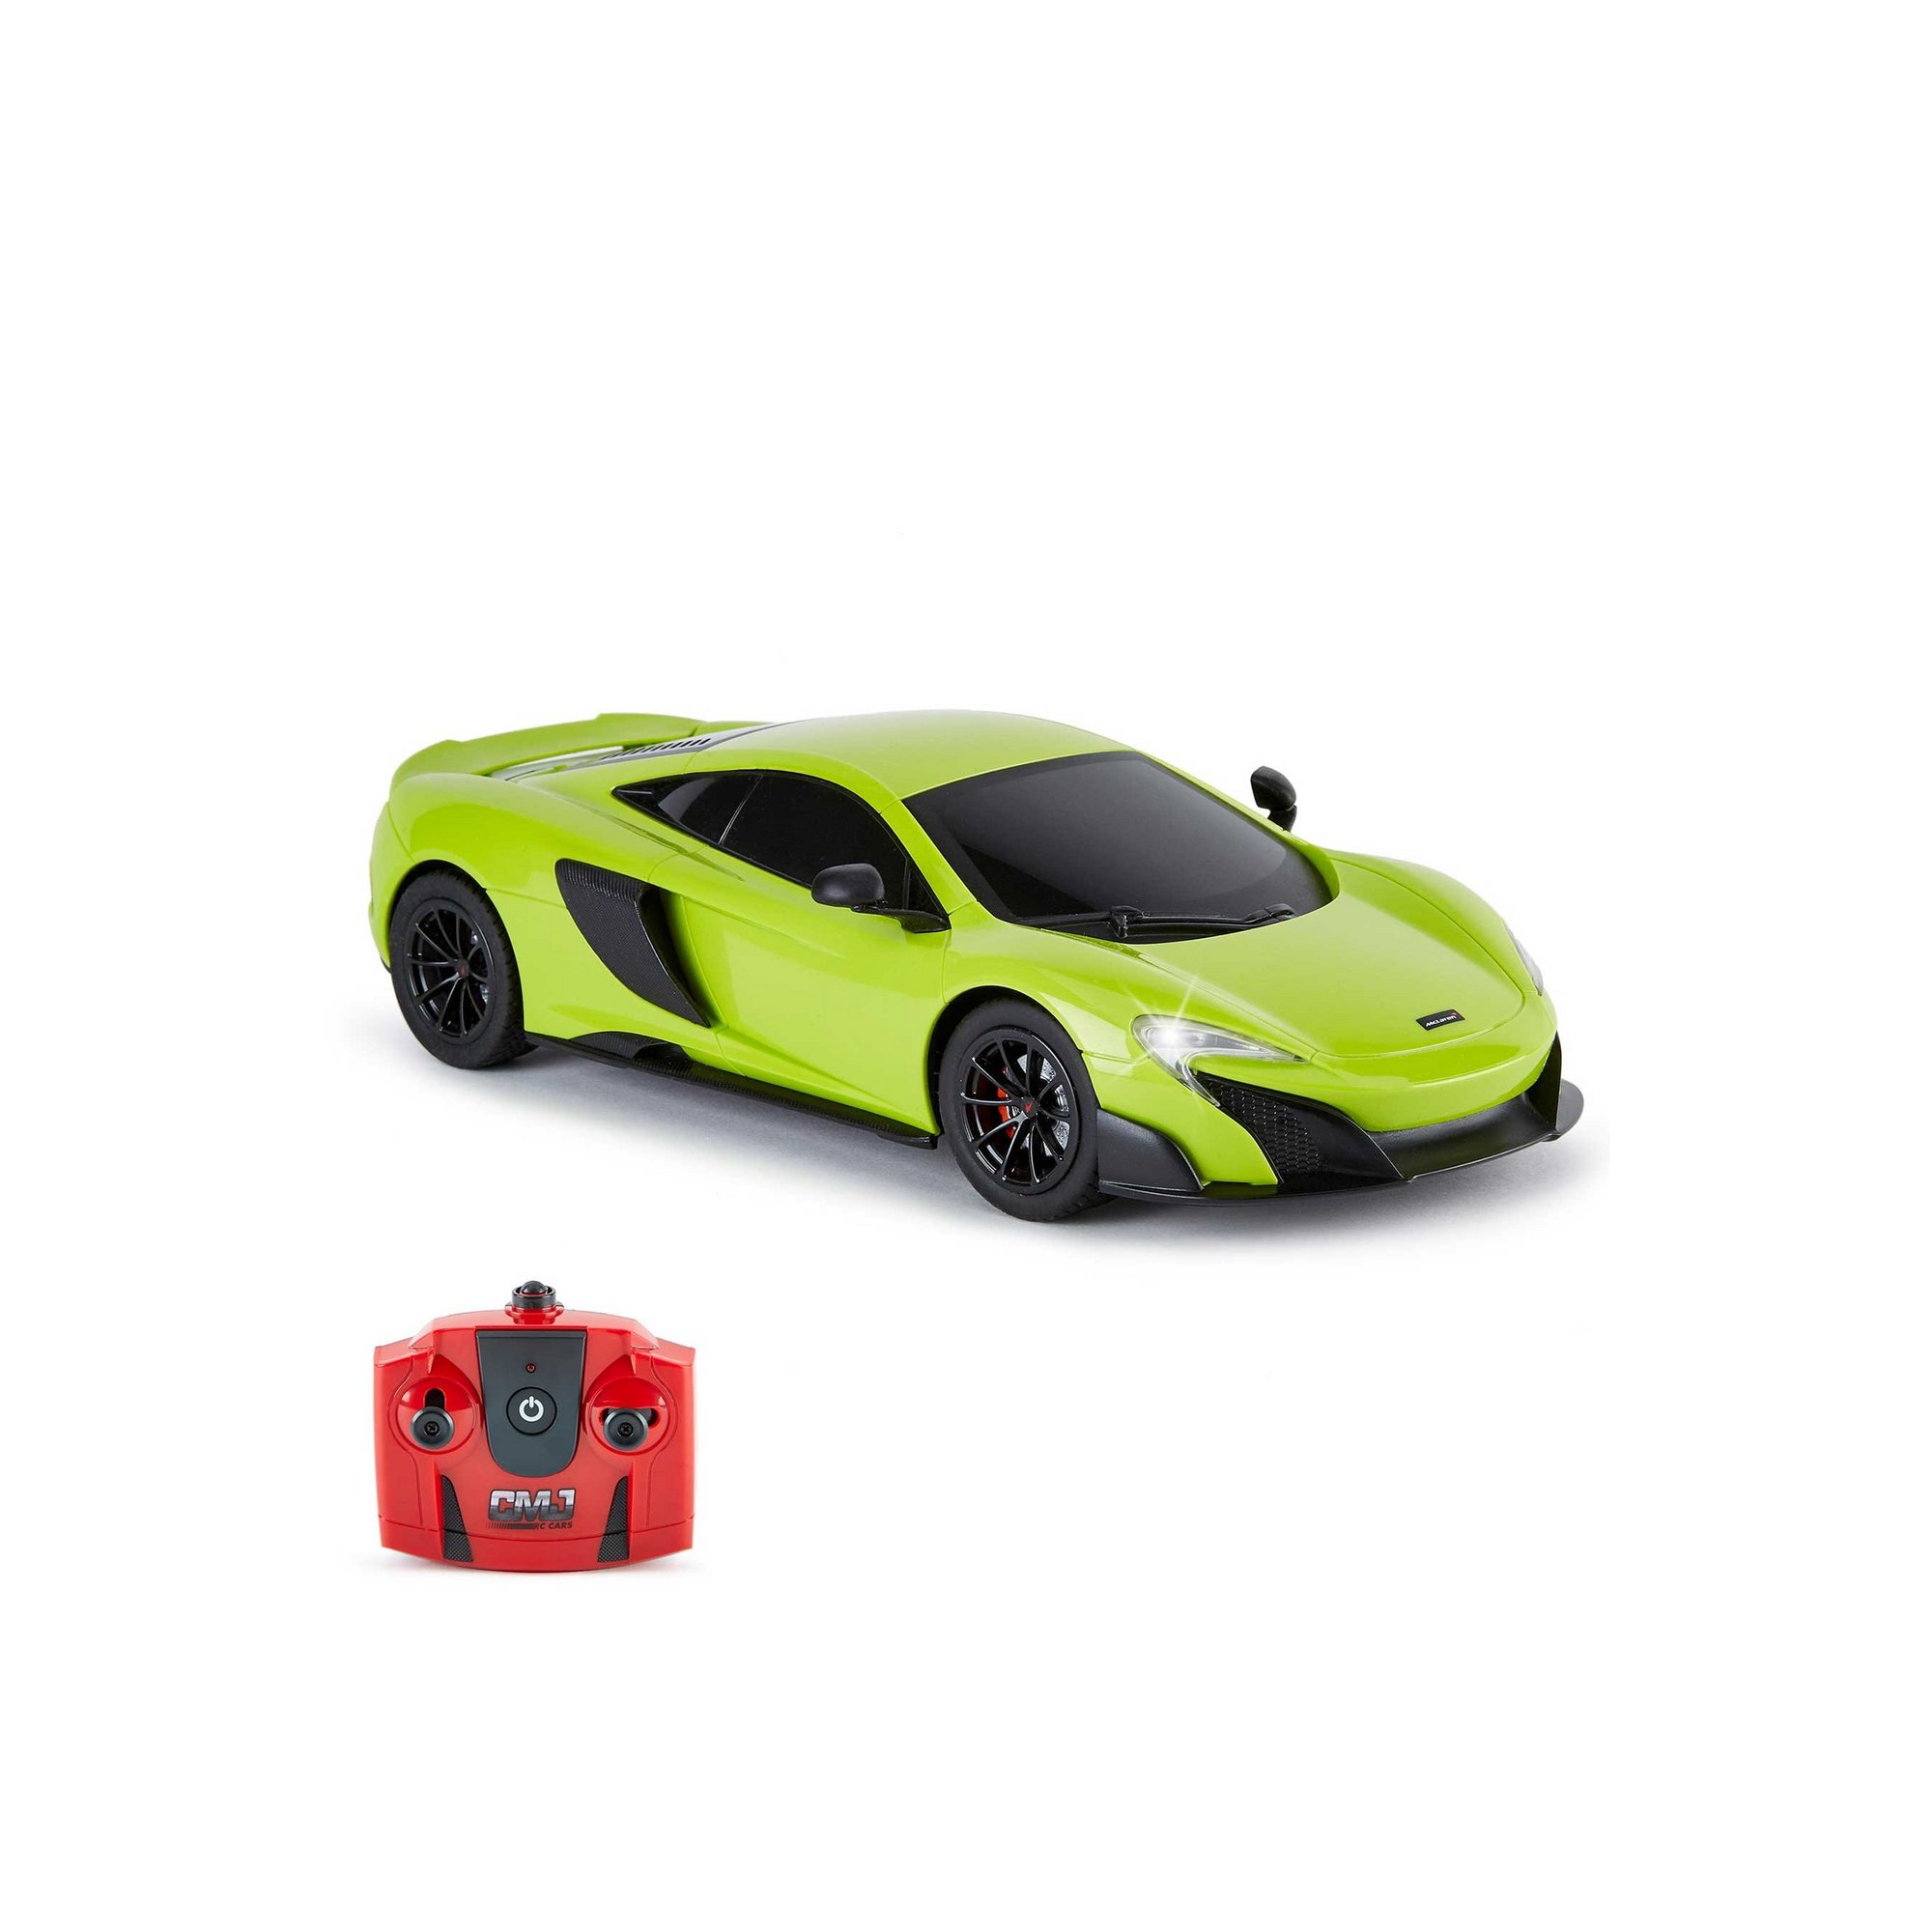 Image of 1:18 Scale Remote Controlled Mclaren 675LT